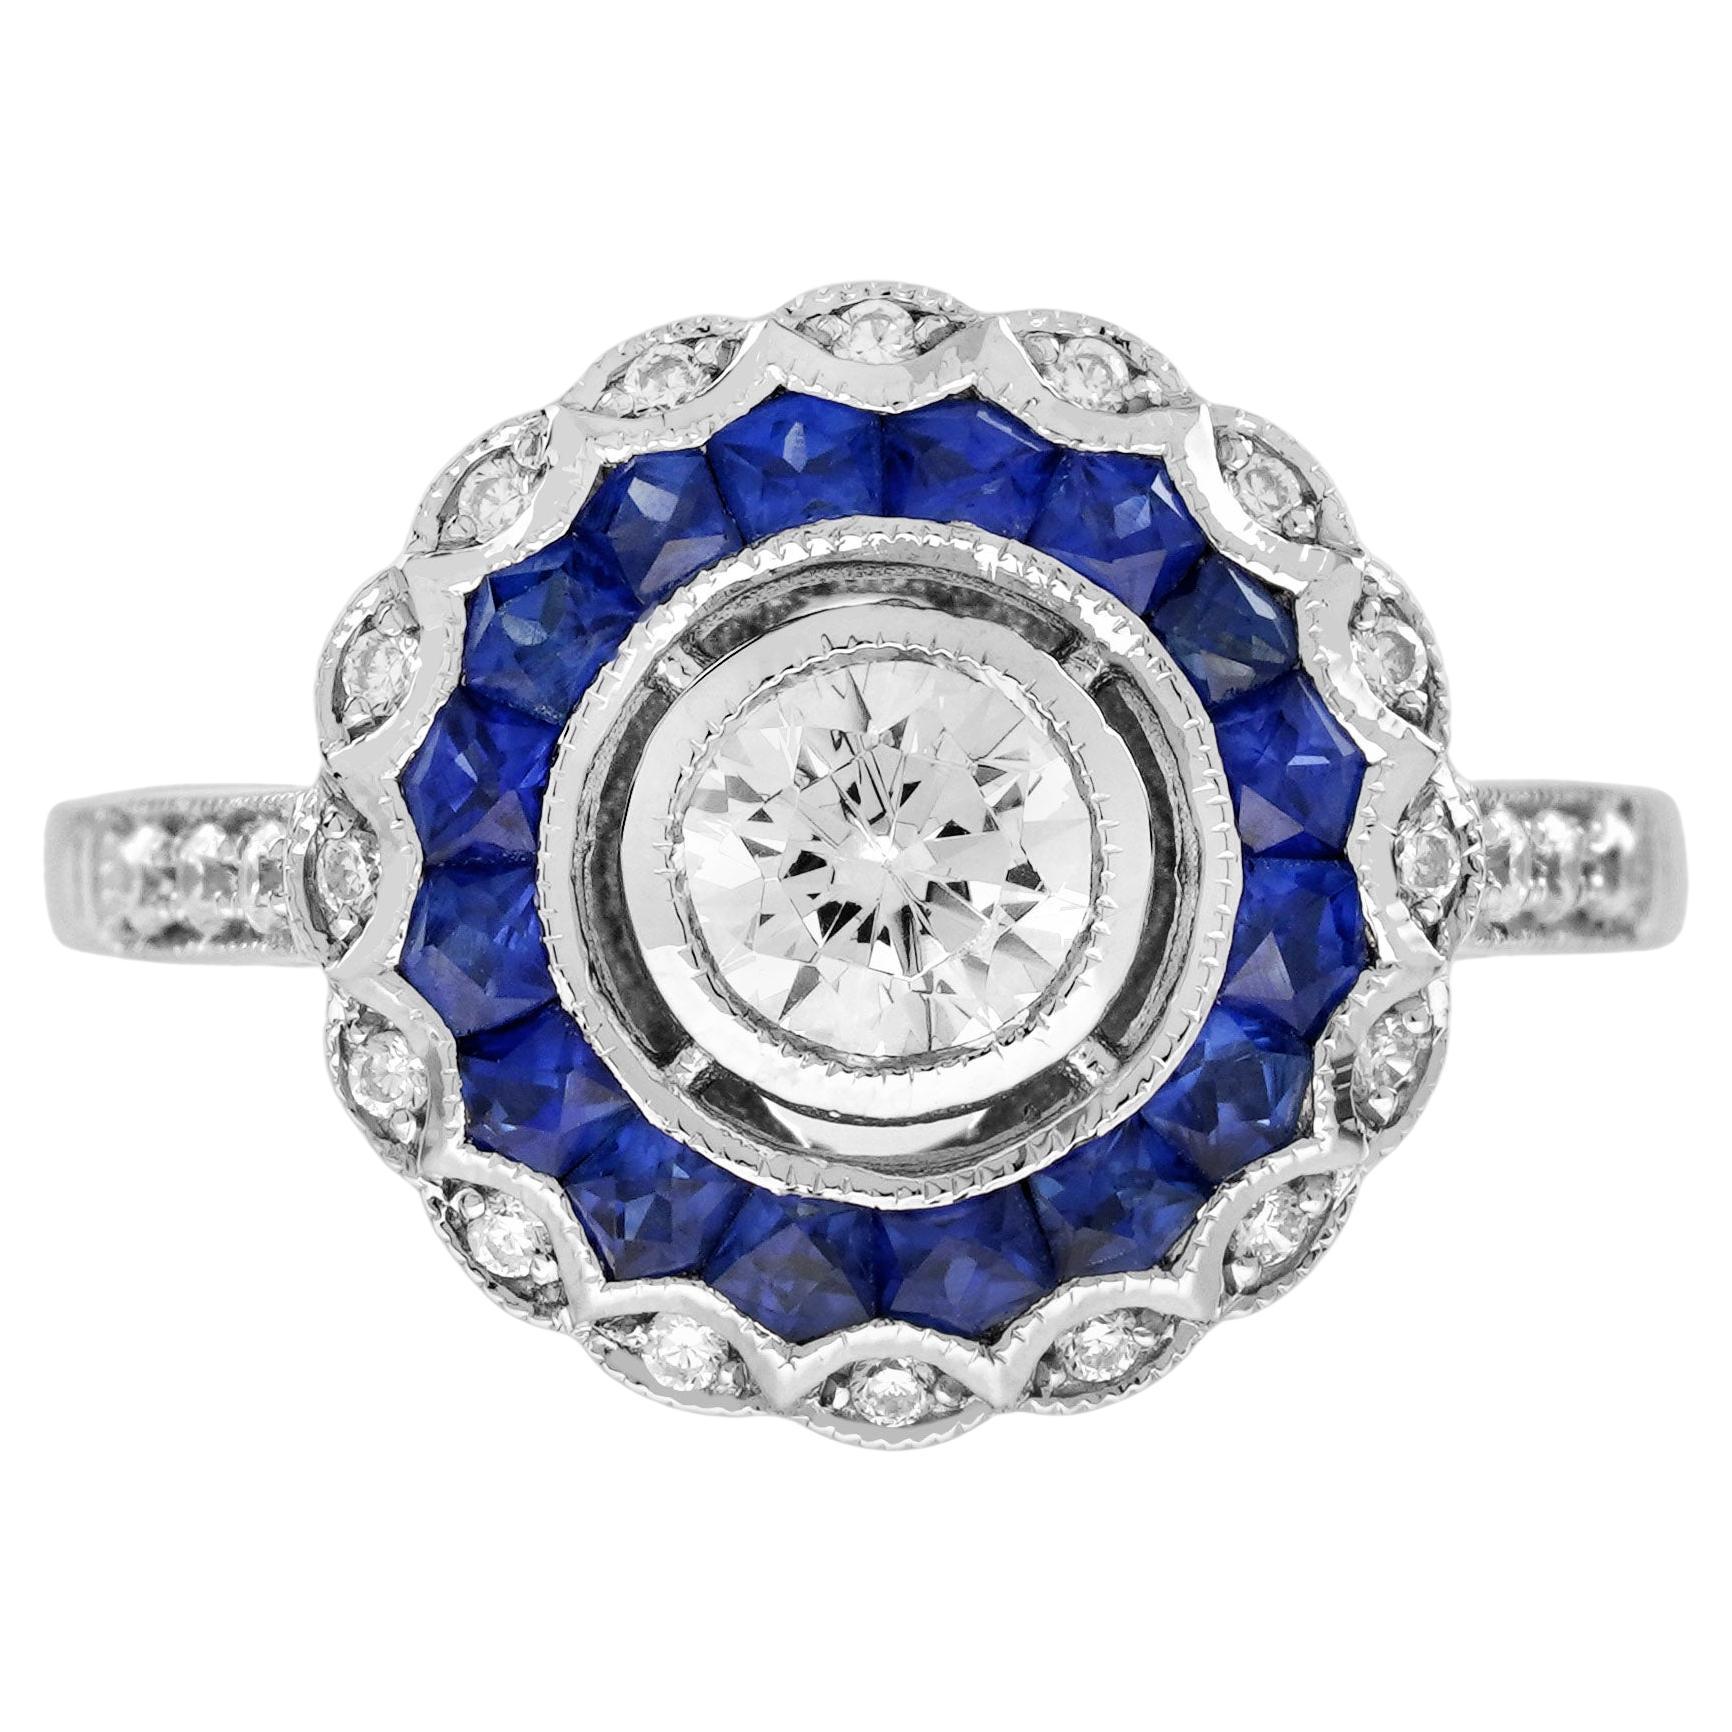 0.5 Ct Diamond Blue Sapphire Art Deco Style Engagement Ring in 18K White Gold For Sale